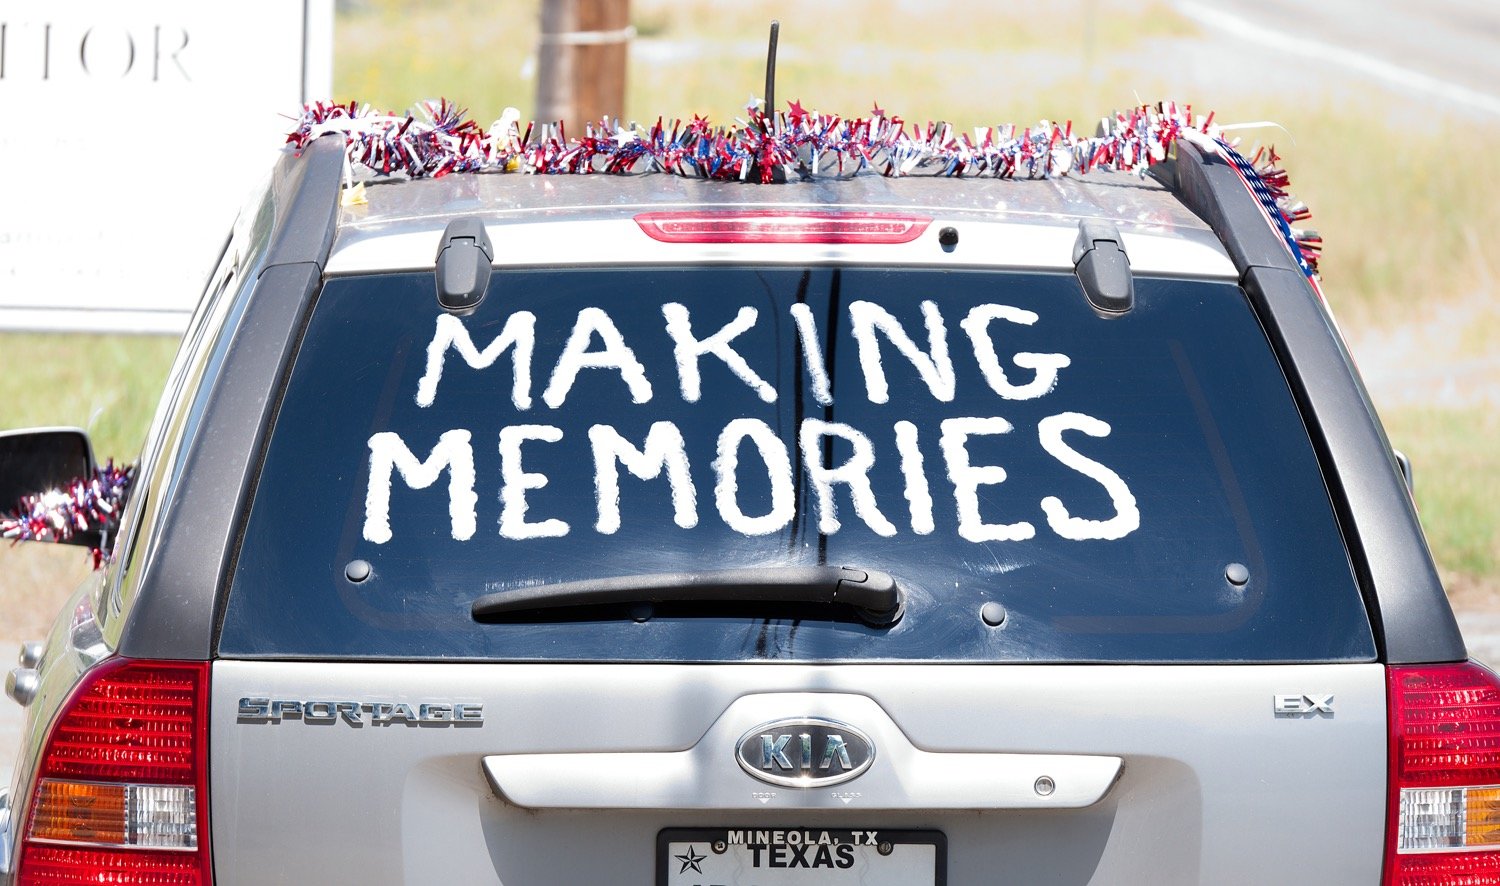 Vehicles were all decked out for the “Making Memories” parade.